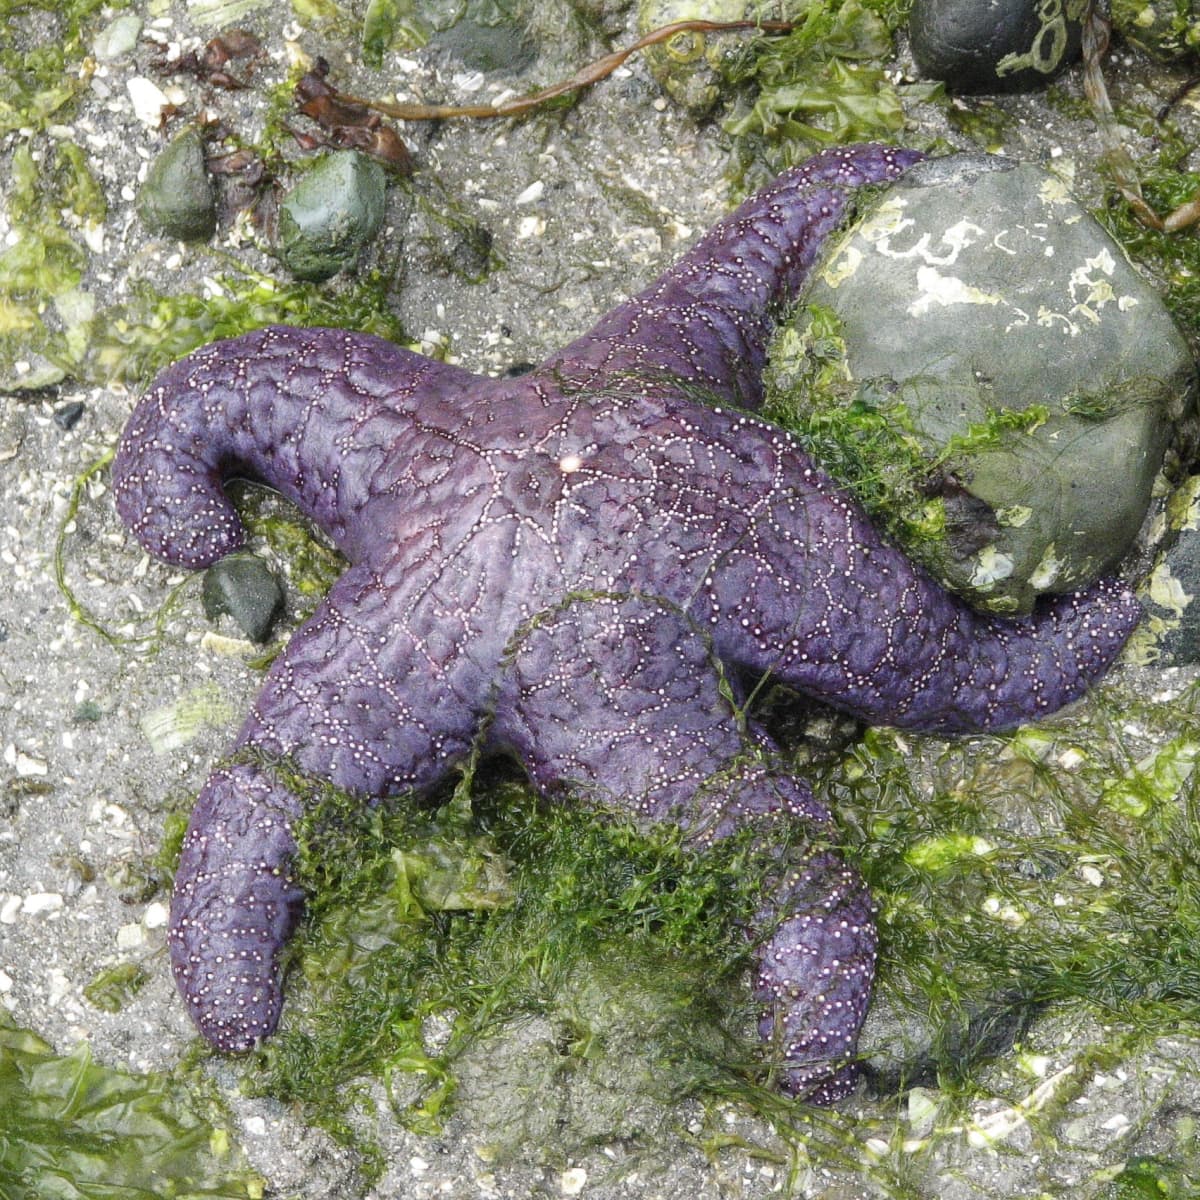 Ochre Sea Star or Starfish Facts and a Major Wasting Disease - Owlcation